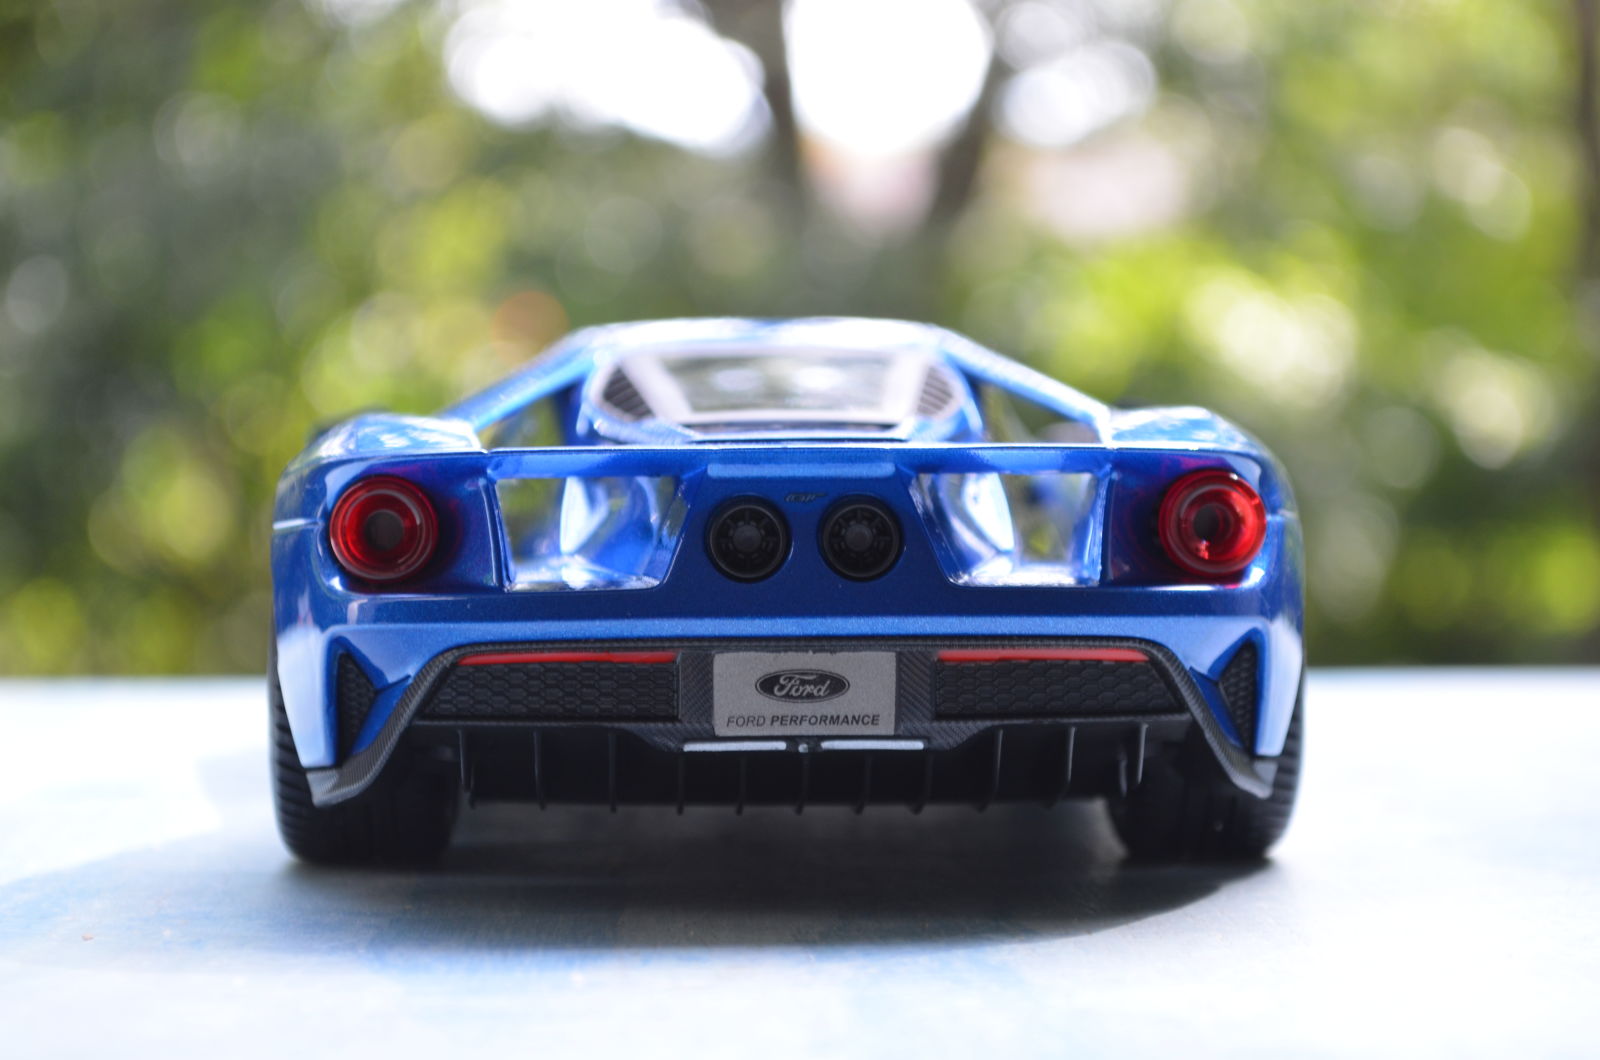 Illustration for article titled LALD Car Week Day 3: 1/18 Liquid Blue Ford GT